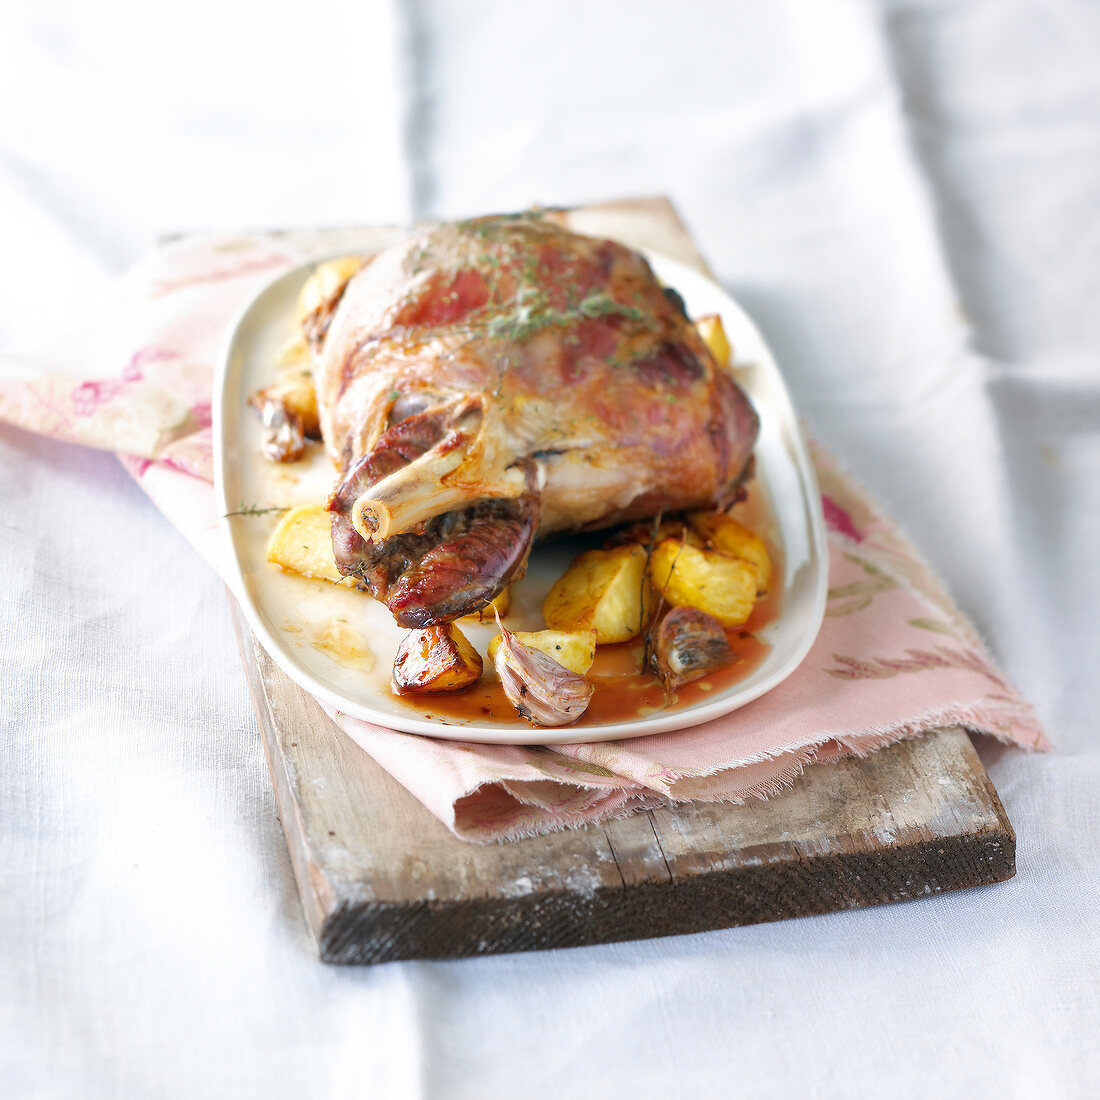 Shoulder of lamb cooked with shallots